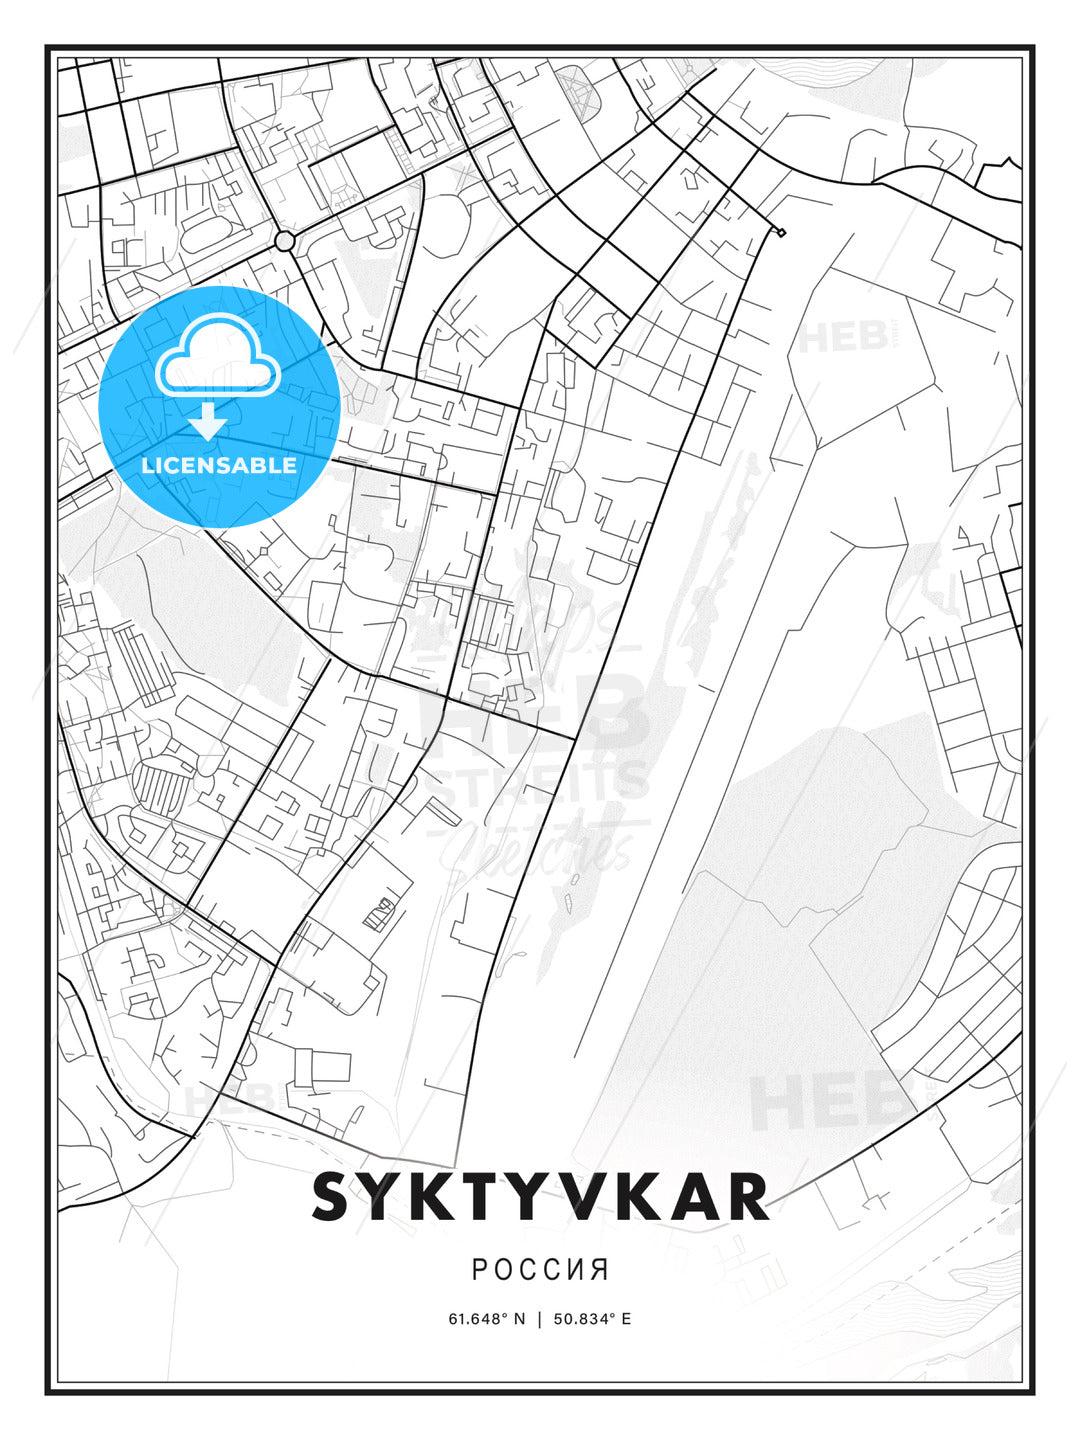 Syktyvkar, Russia, Modern Print Template in Various Formats - HEBSTREITS Sketches